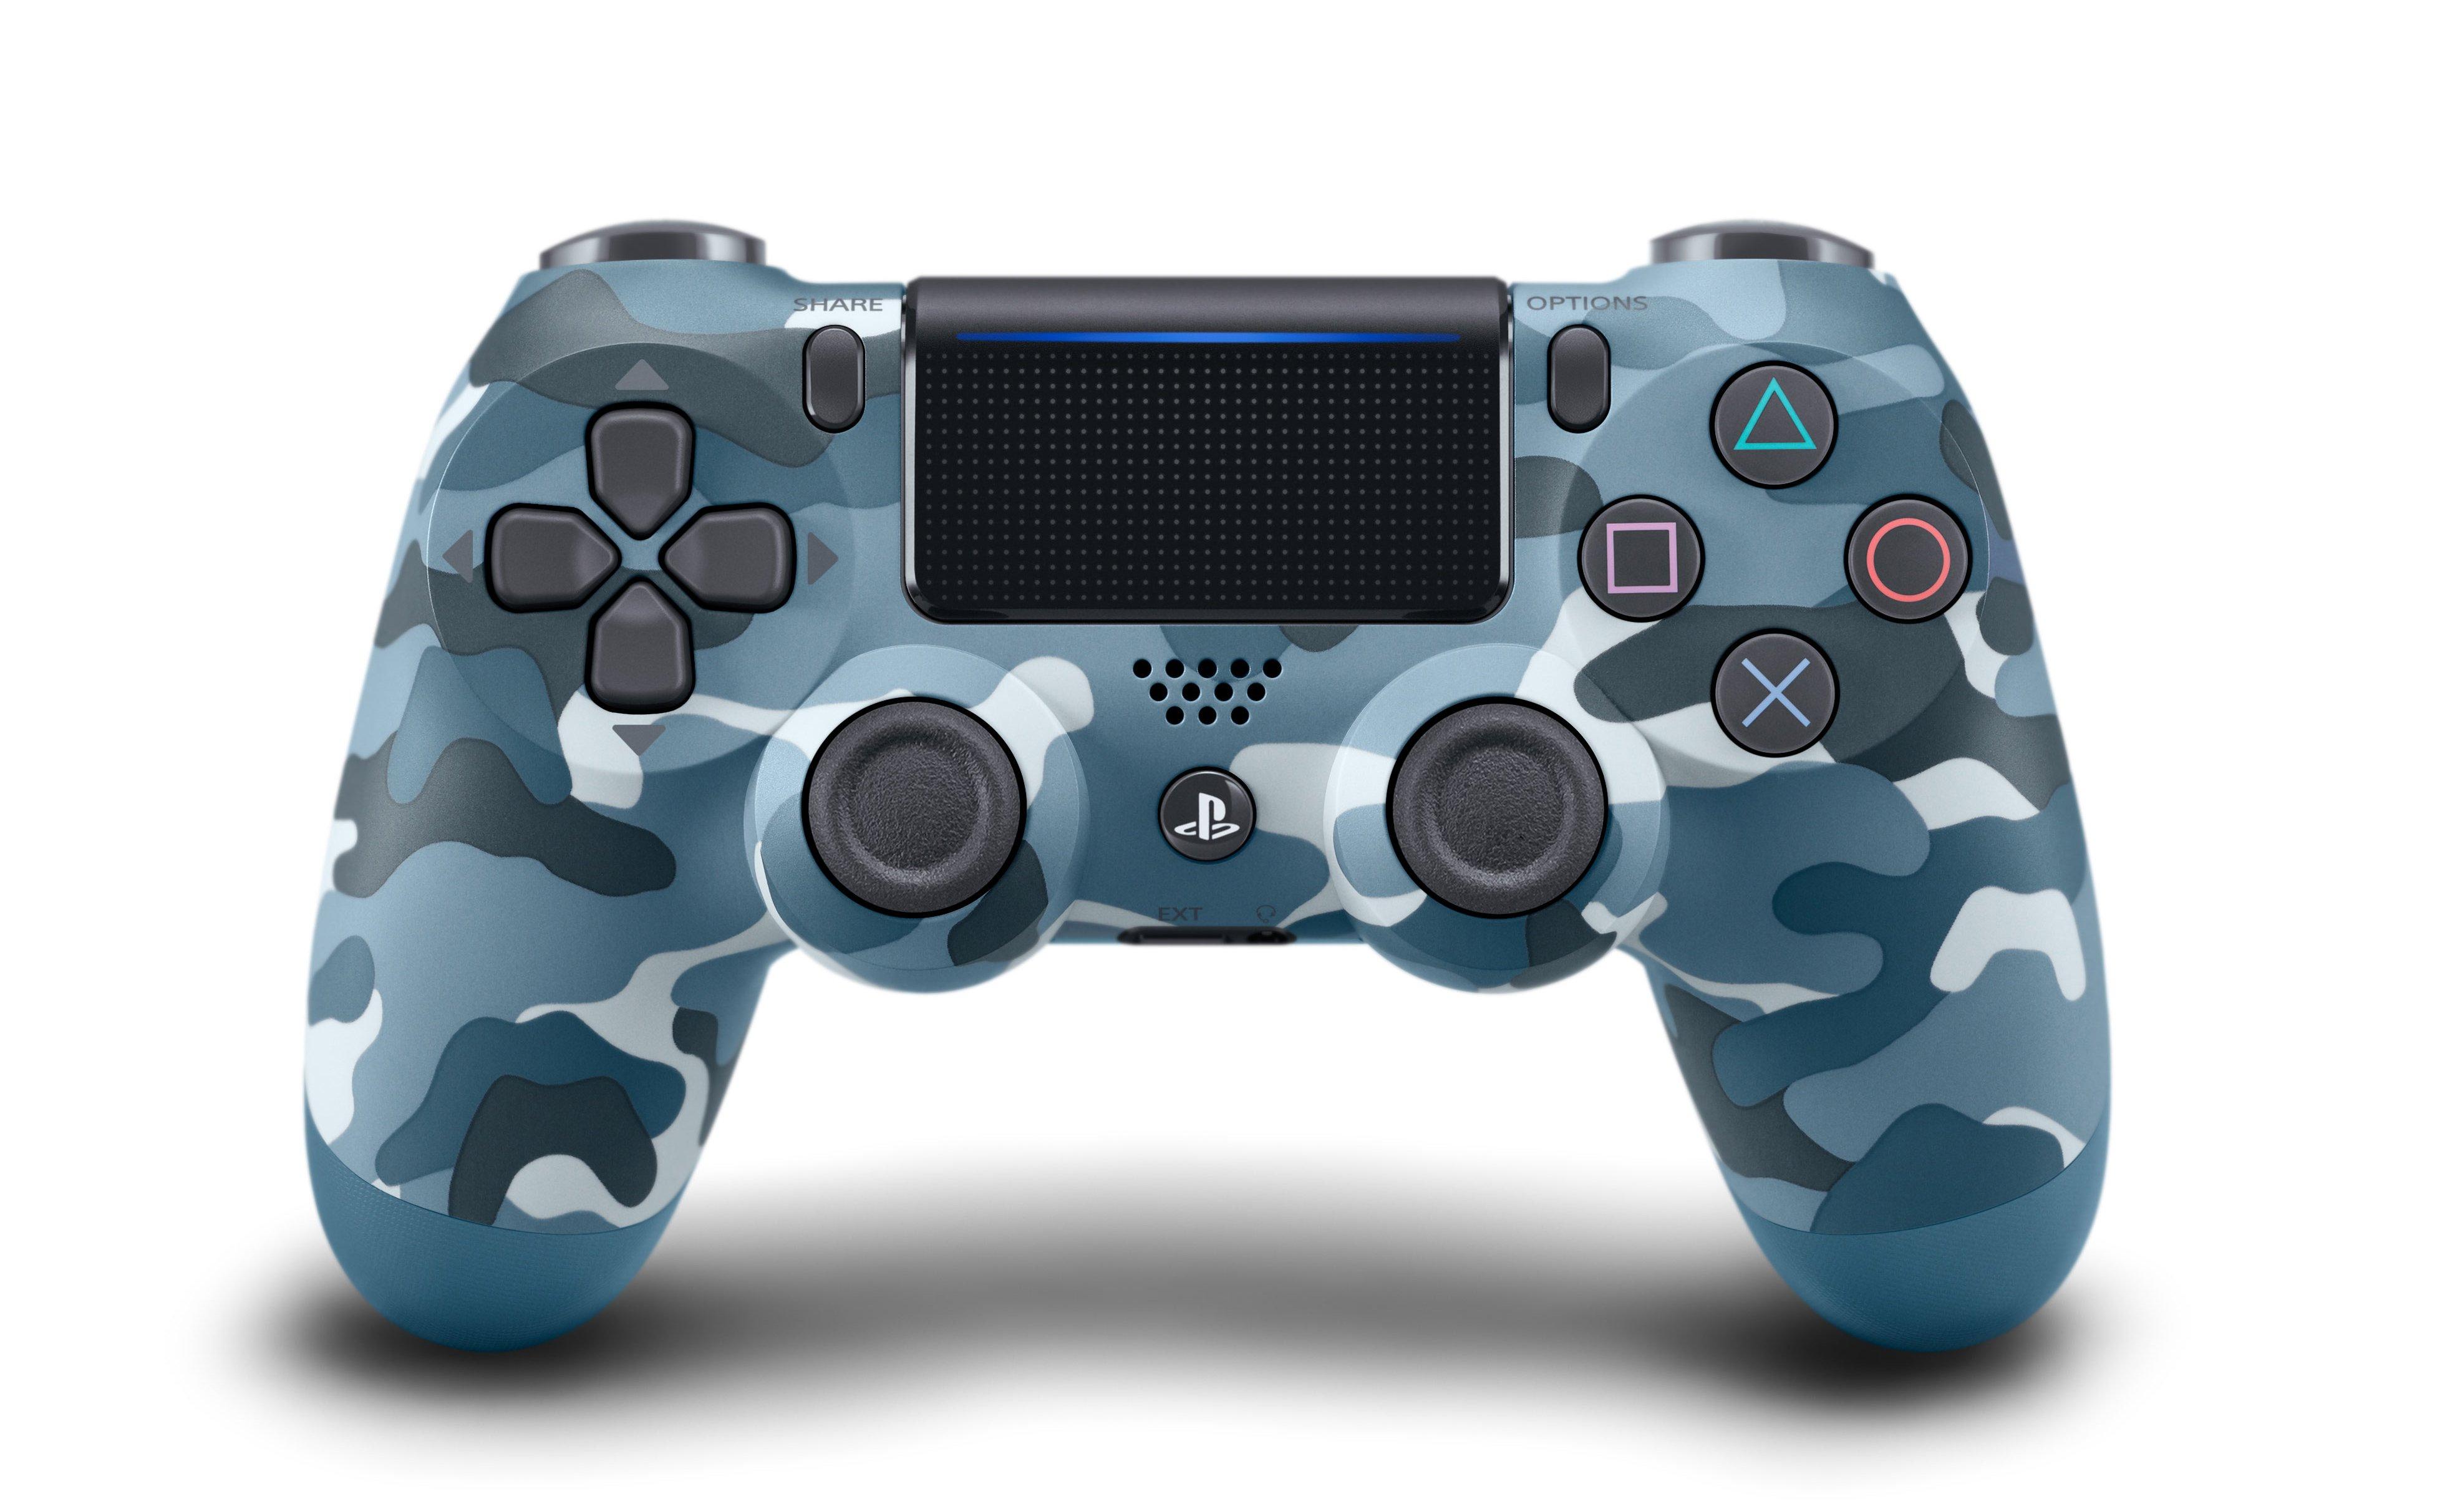 Sony DUALSHOCK 4 Wireless Controller for PlayStation 4 - Blue Camo